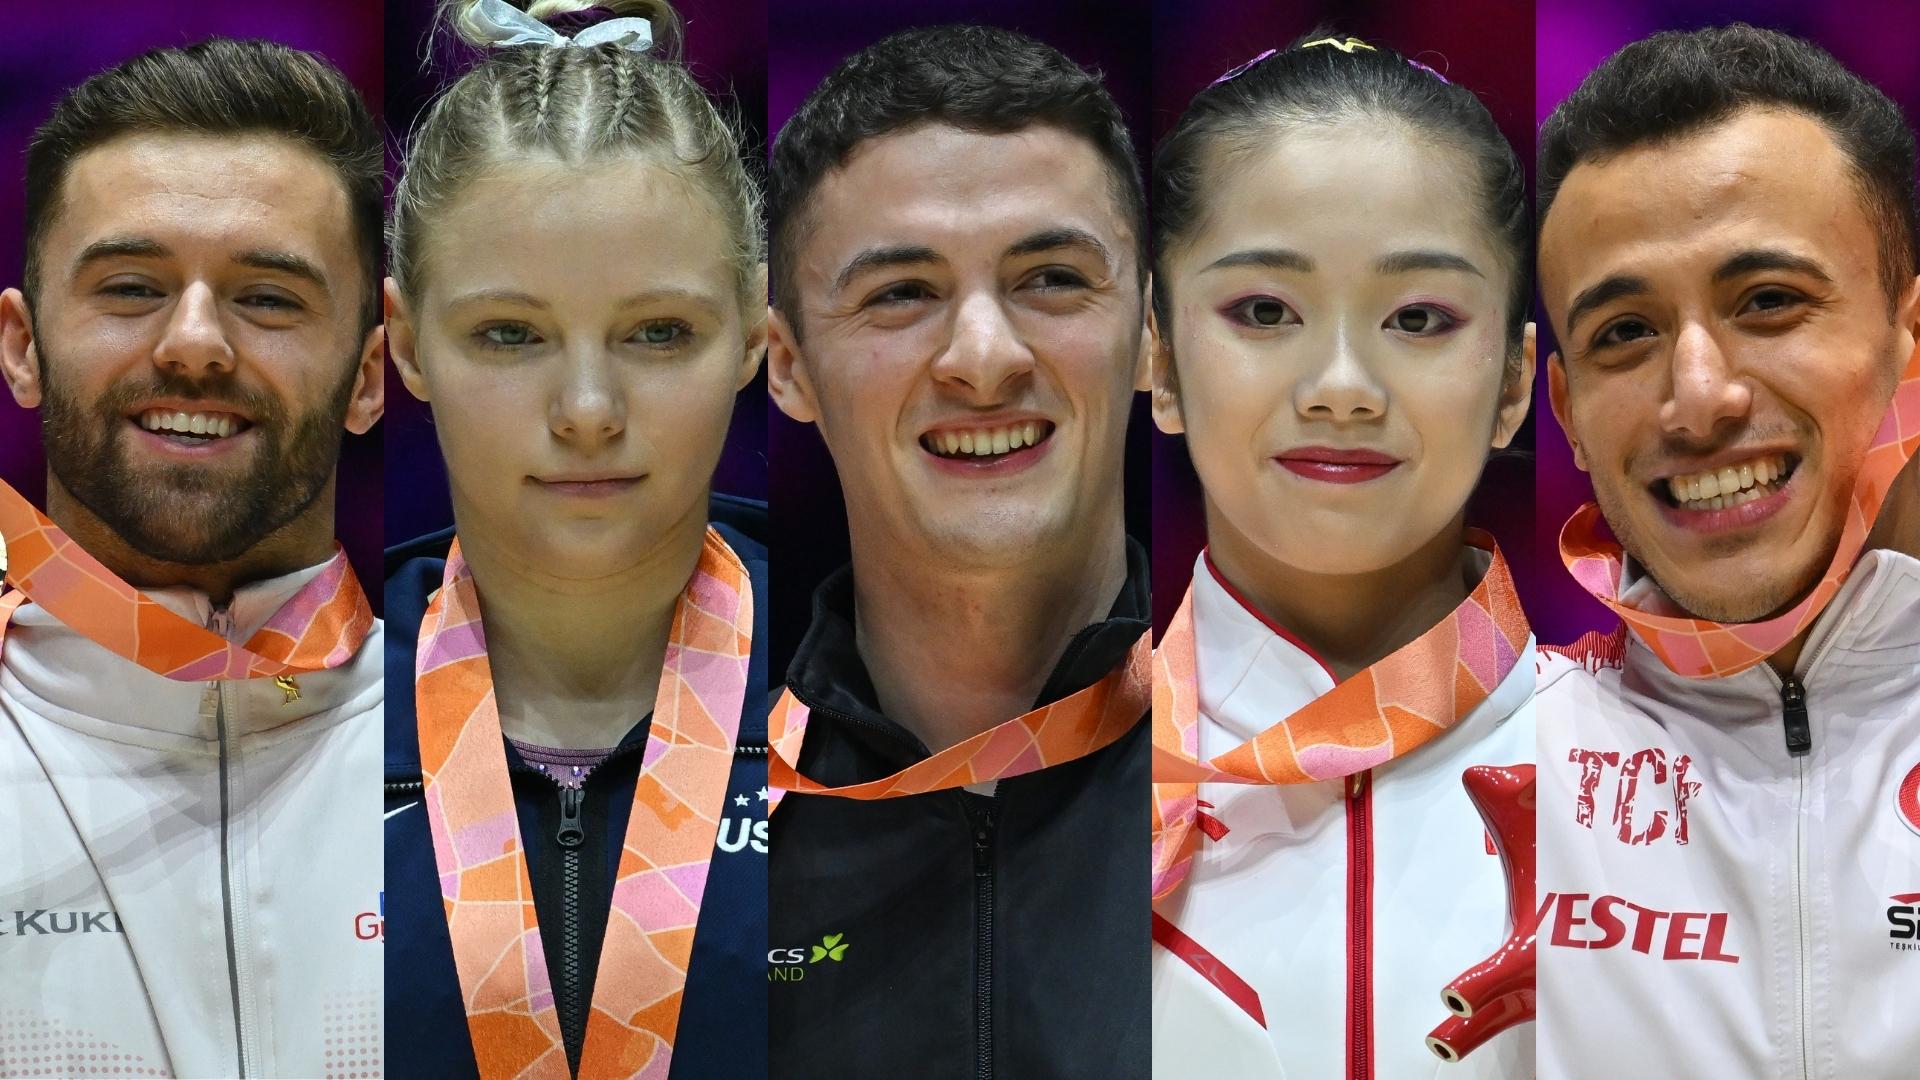 Five world champions were crowned on Saturday during Day 1 of Event Finals at the 2022 World Gymnastics Championships. From left to right: floor champion Giarnni Regini-Moran, vault champion Jade Carey, pommel horse champion Rhys McClenaghan, uneven bars champion Xiaoyuan Wei, and still rings champion Adem Asil.